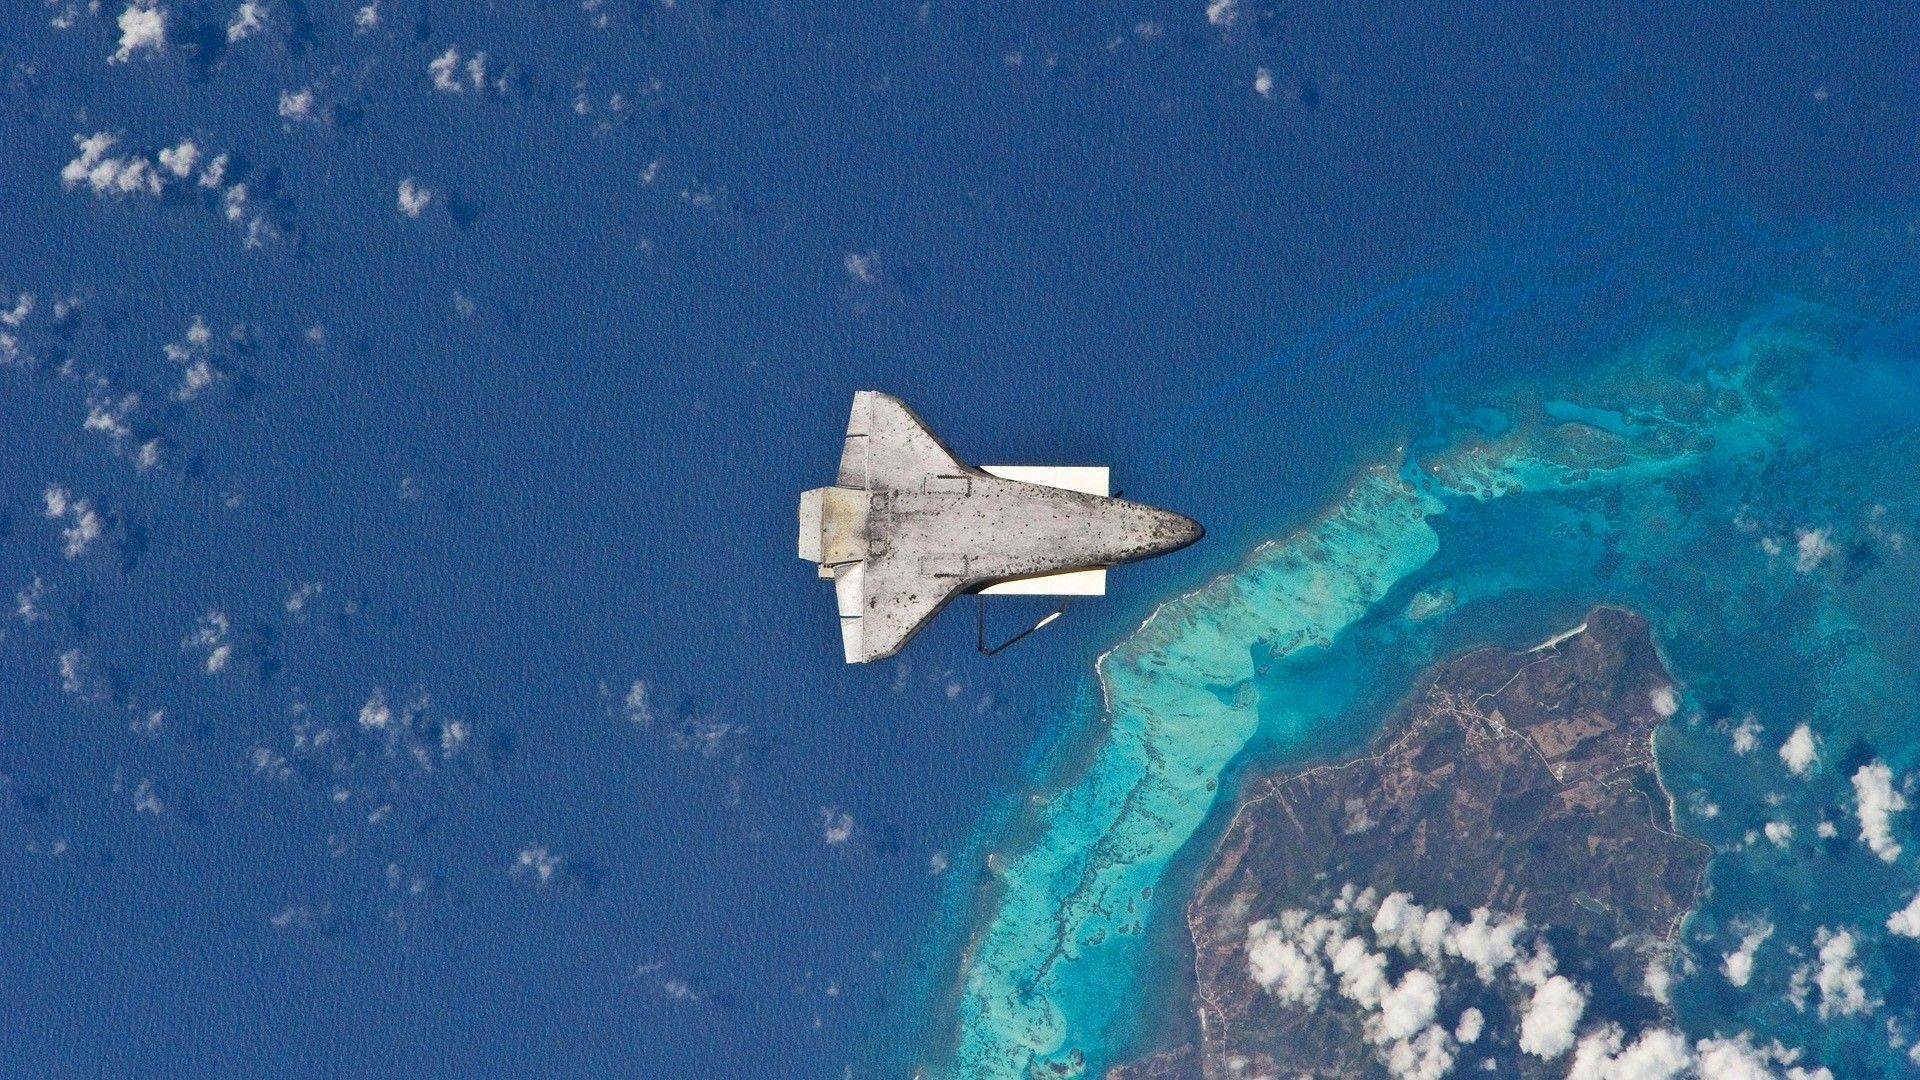 1920x1080 92 Space Shuttle Wallpapers | Space Shuttle Backgrounds